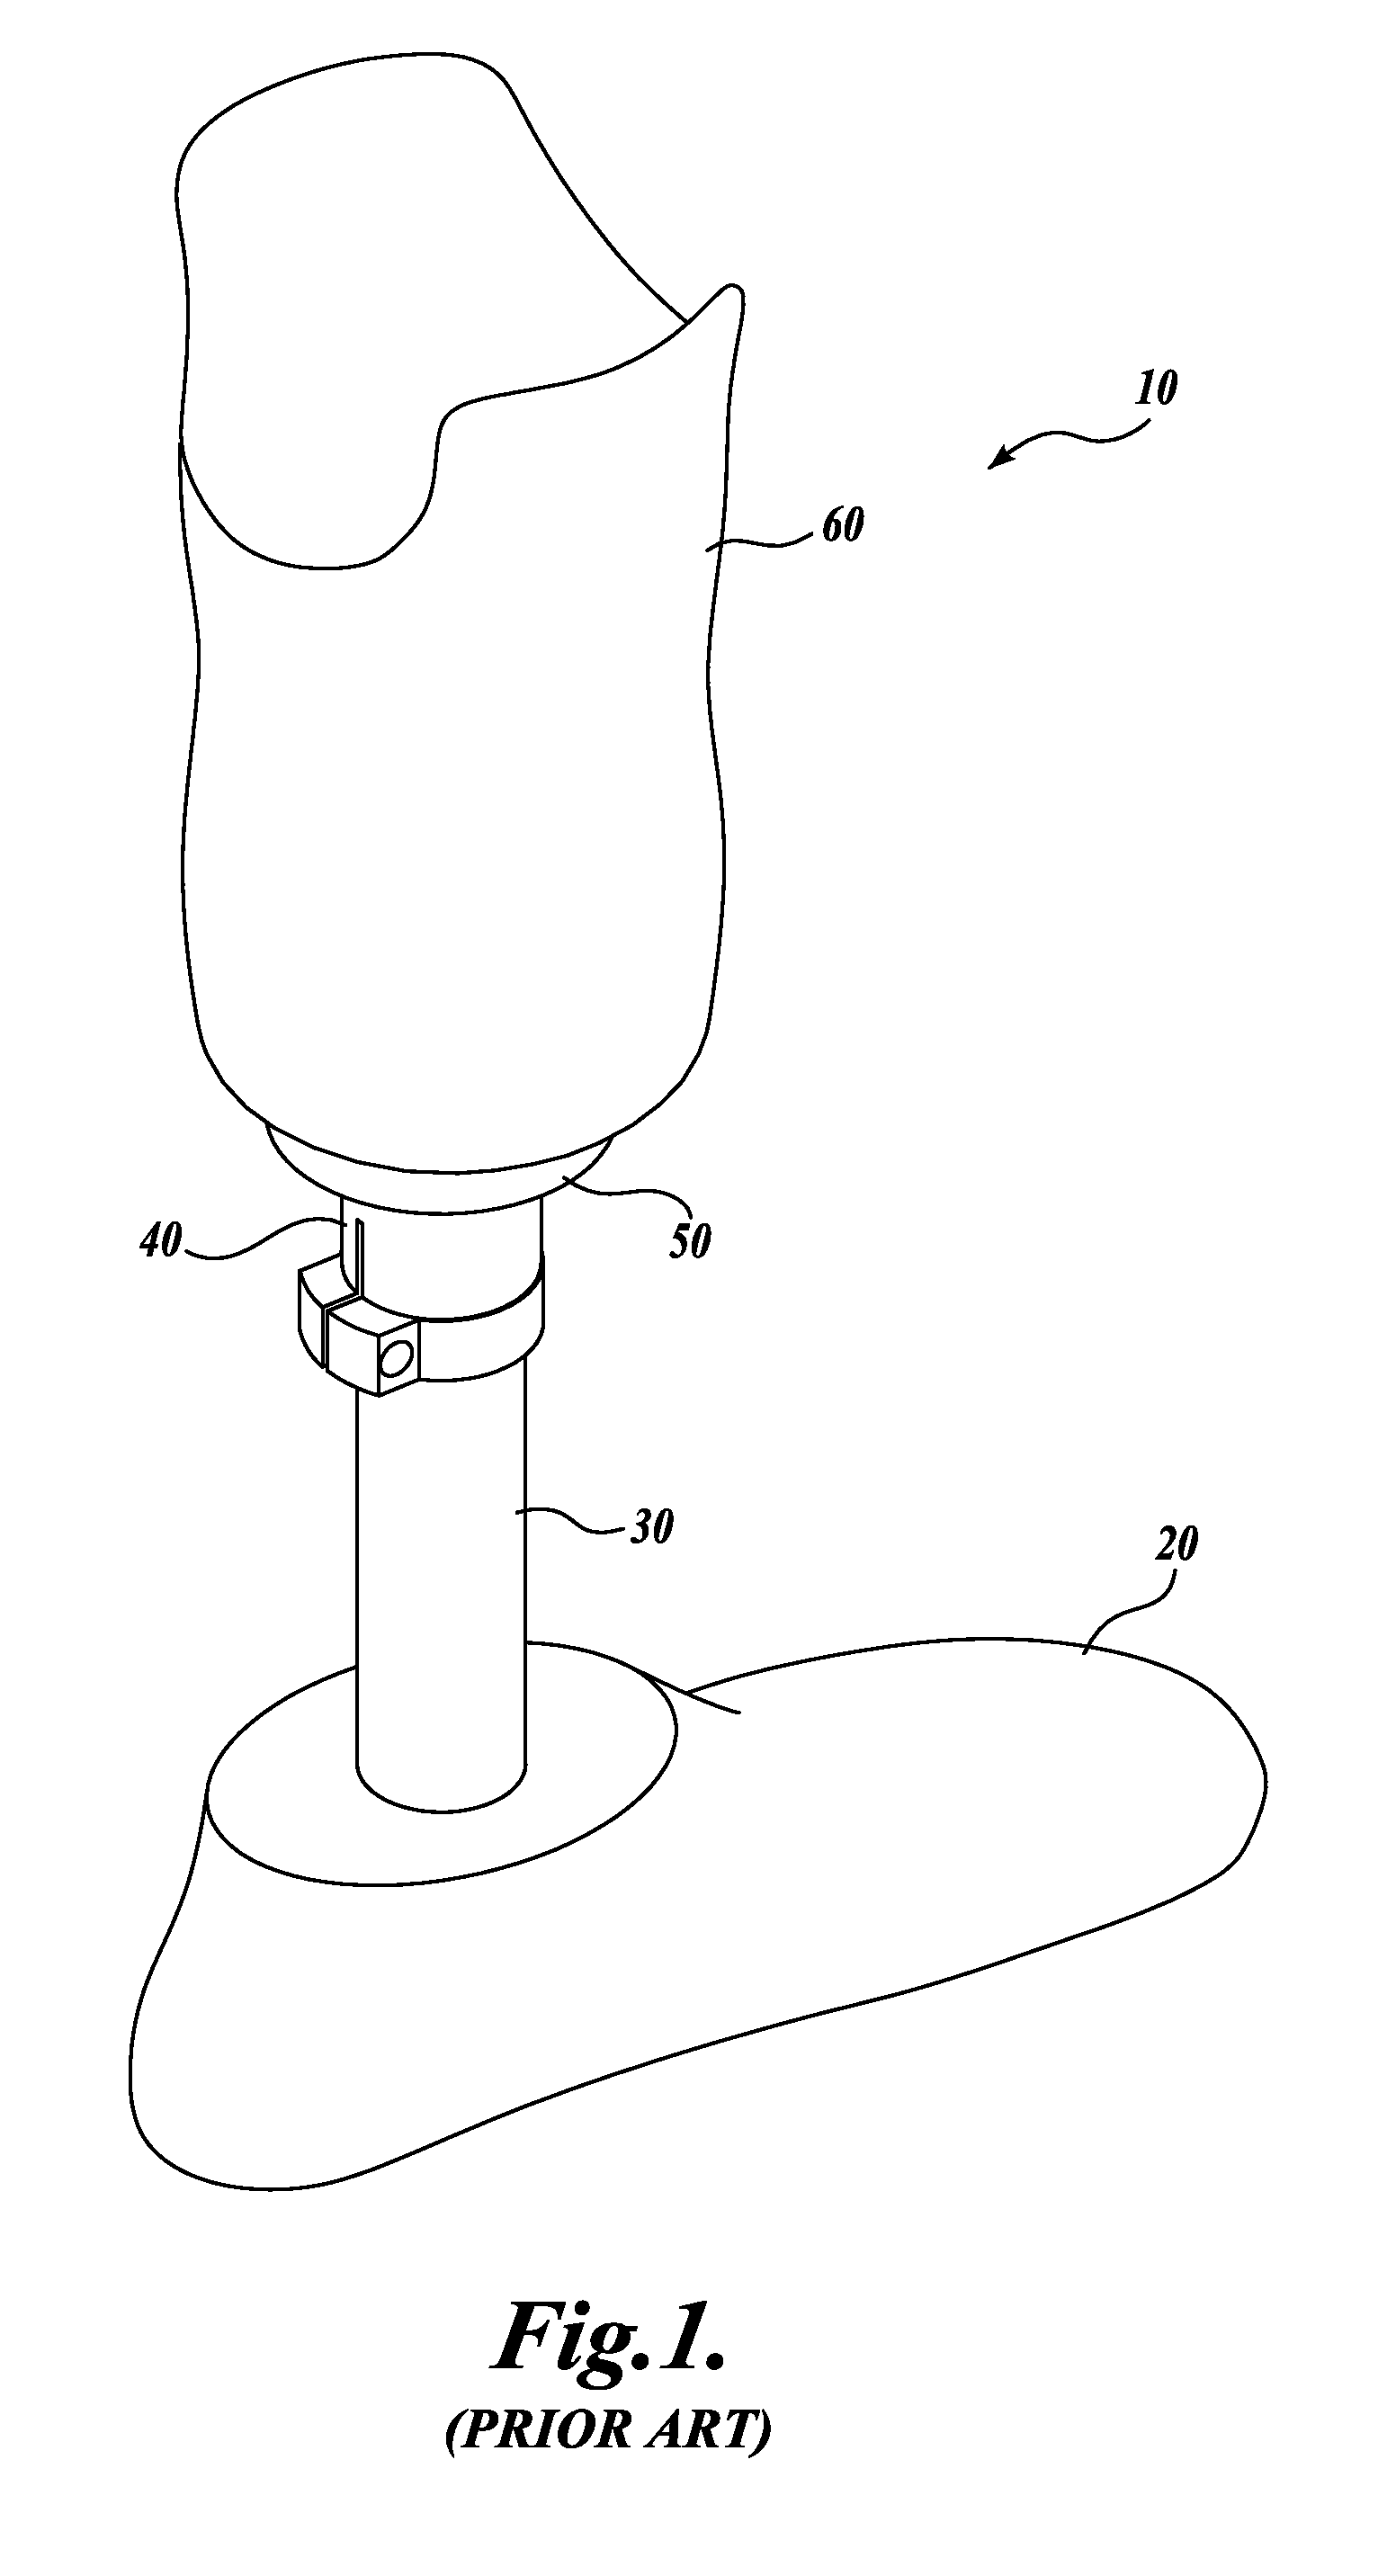 Method for aligning a prosthesis